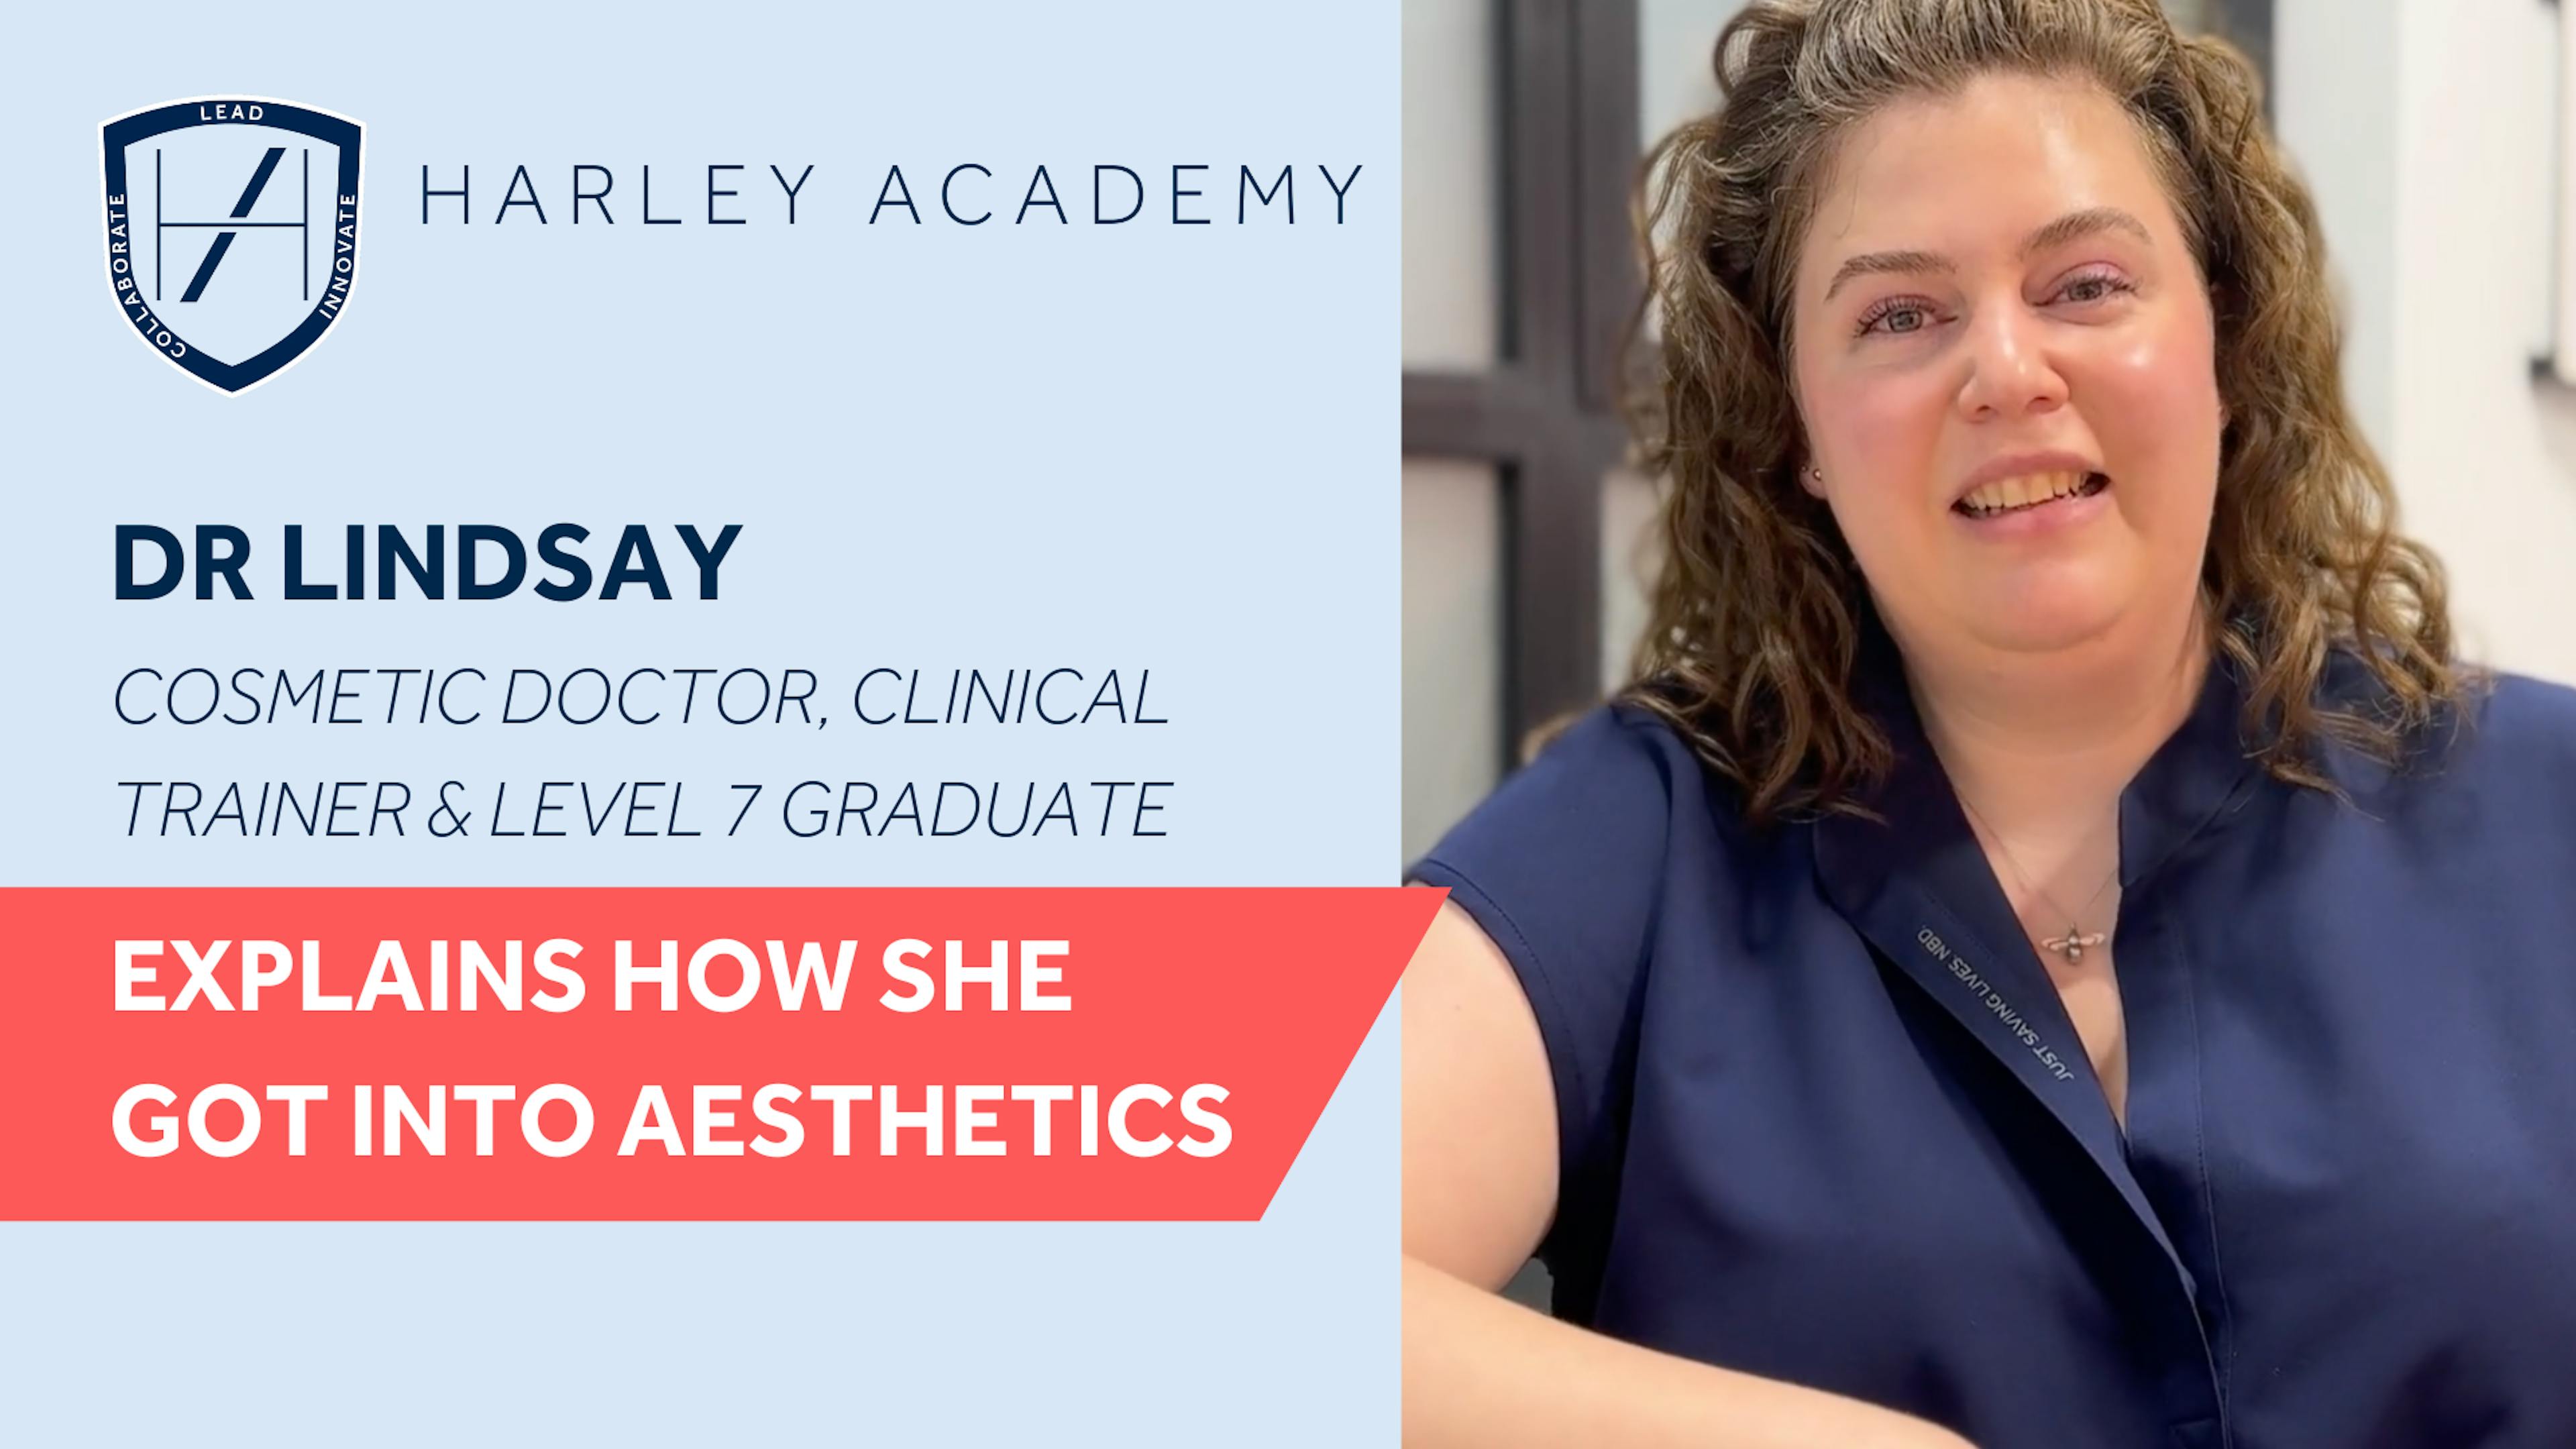 Brighton Cosmetic Doctor Dr Lindsay Jones on her aesthetic medicine training journey and medical career with Harley Academy